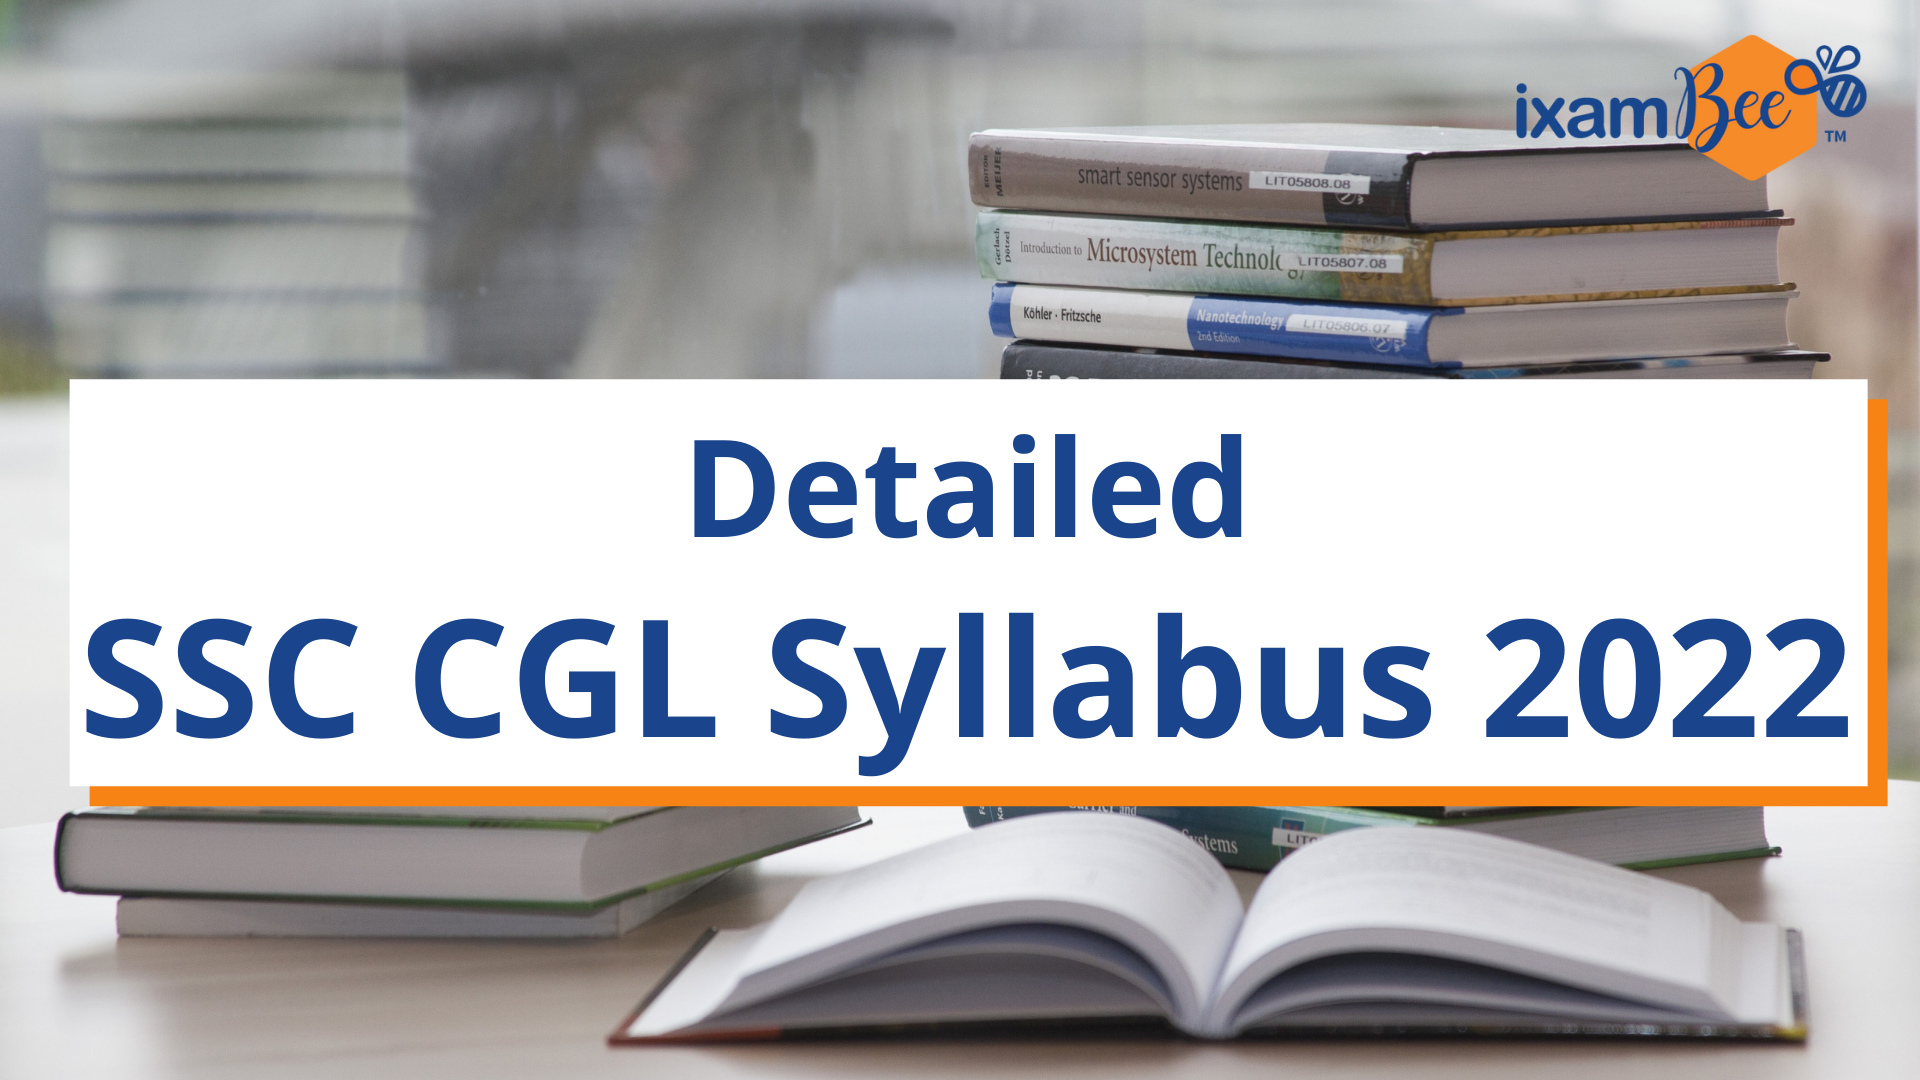 SSC CGL Syllabus 2022 in Detail: Topic Wise Coverage of All Sections